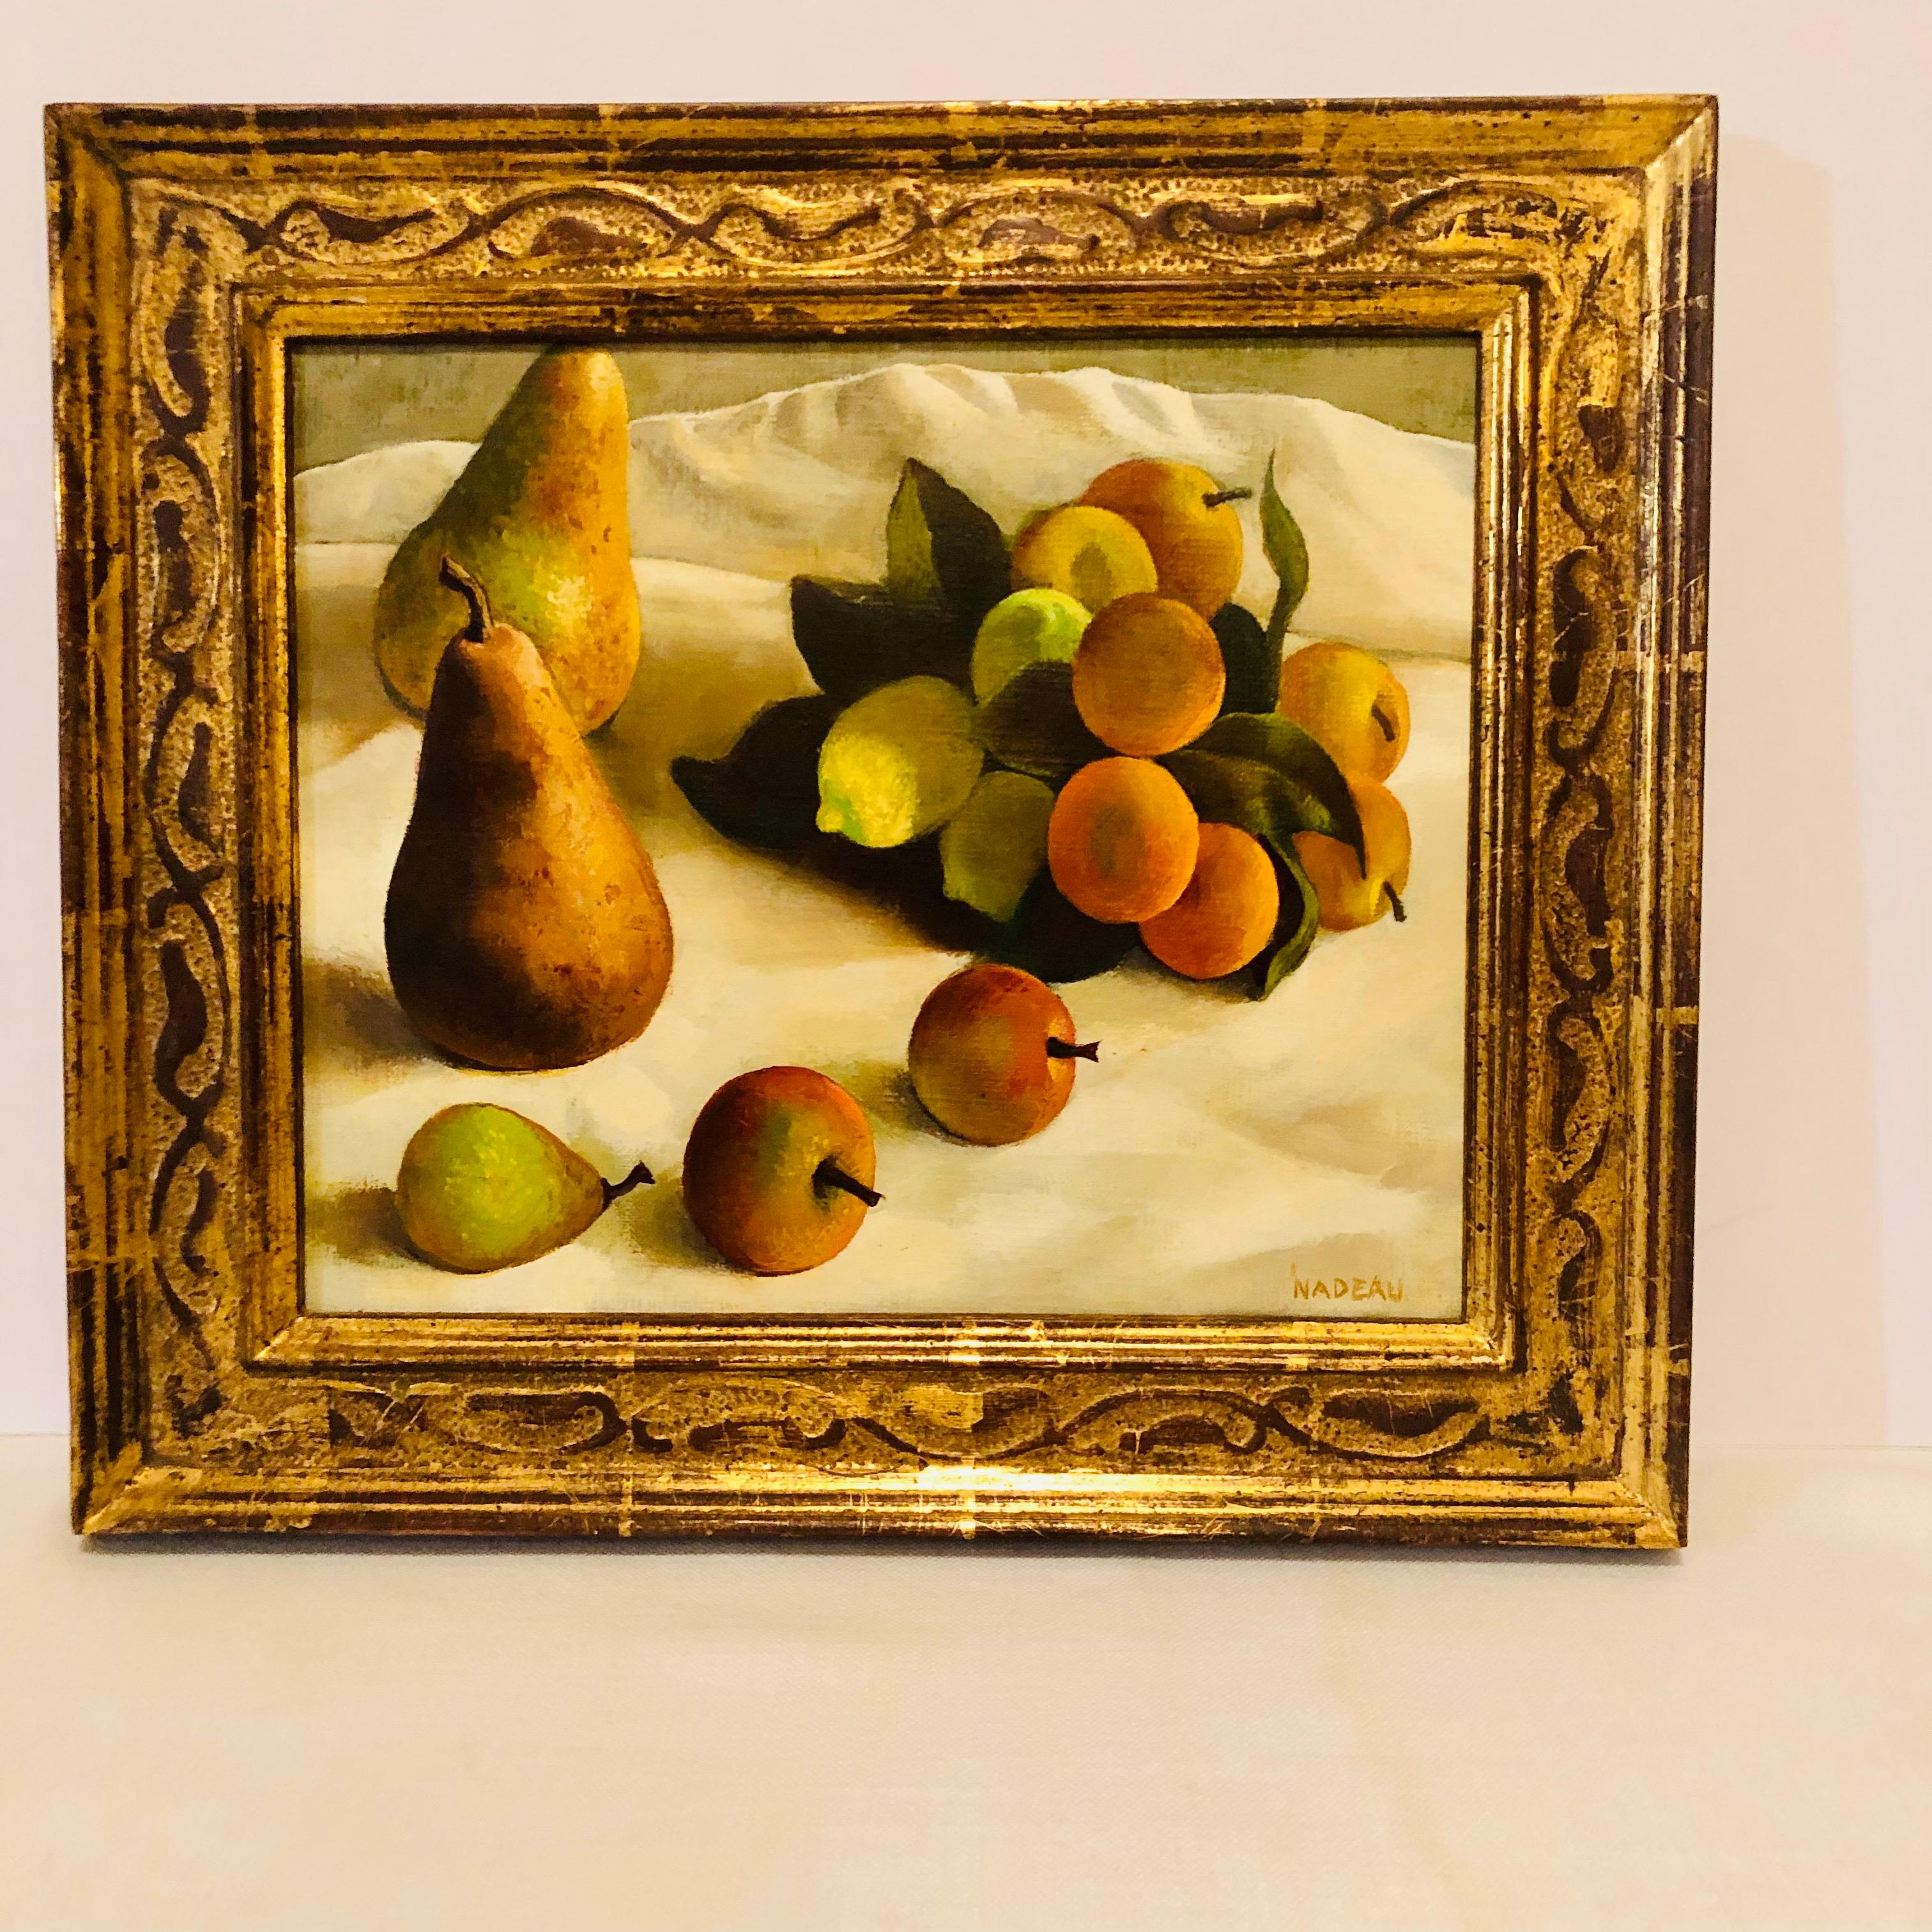 American Oil on Canvas Painting of Pears and Other Fruits in a Gold Frame Signed Nadeau